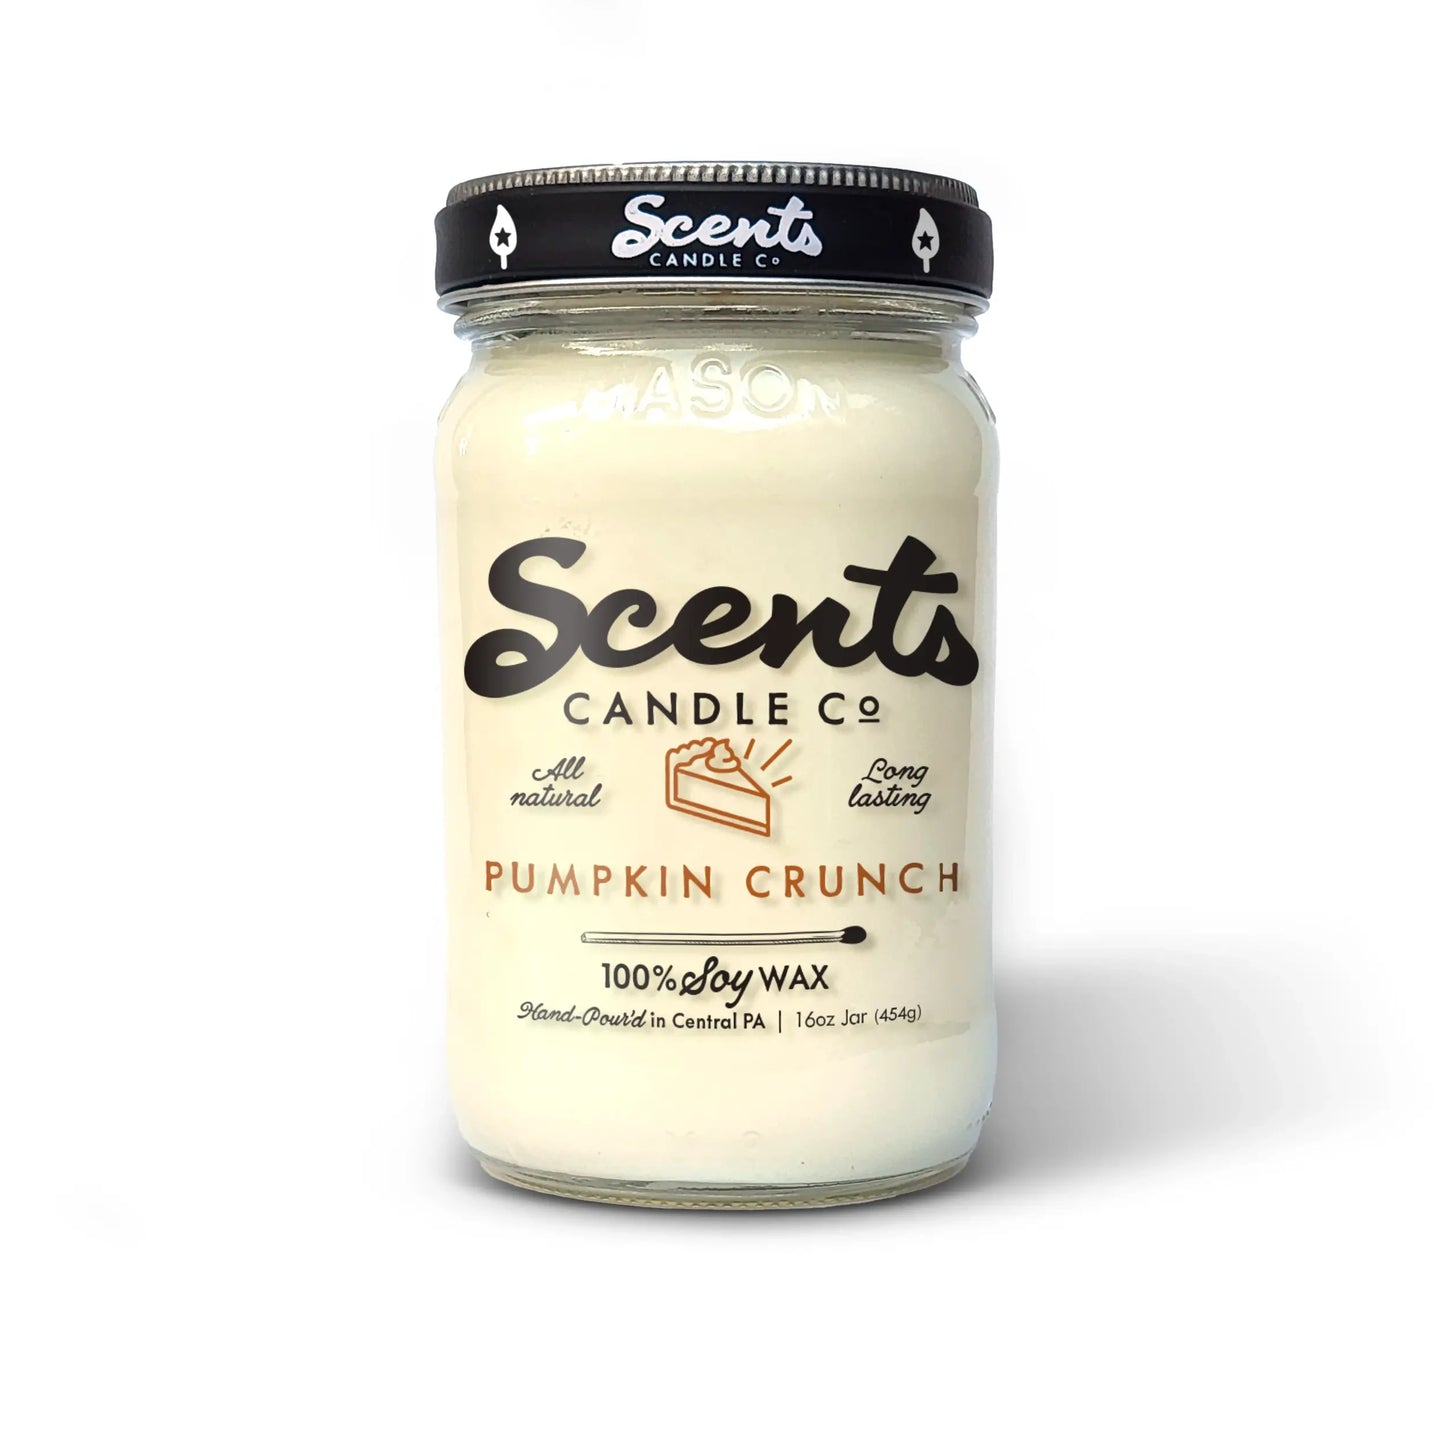 Scents Candle Co. Pumpkin Crunch Soy Wax Candles